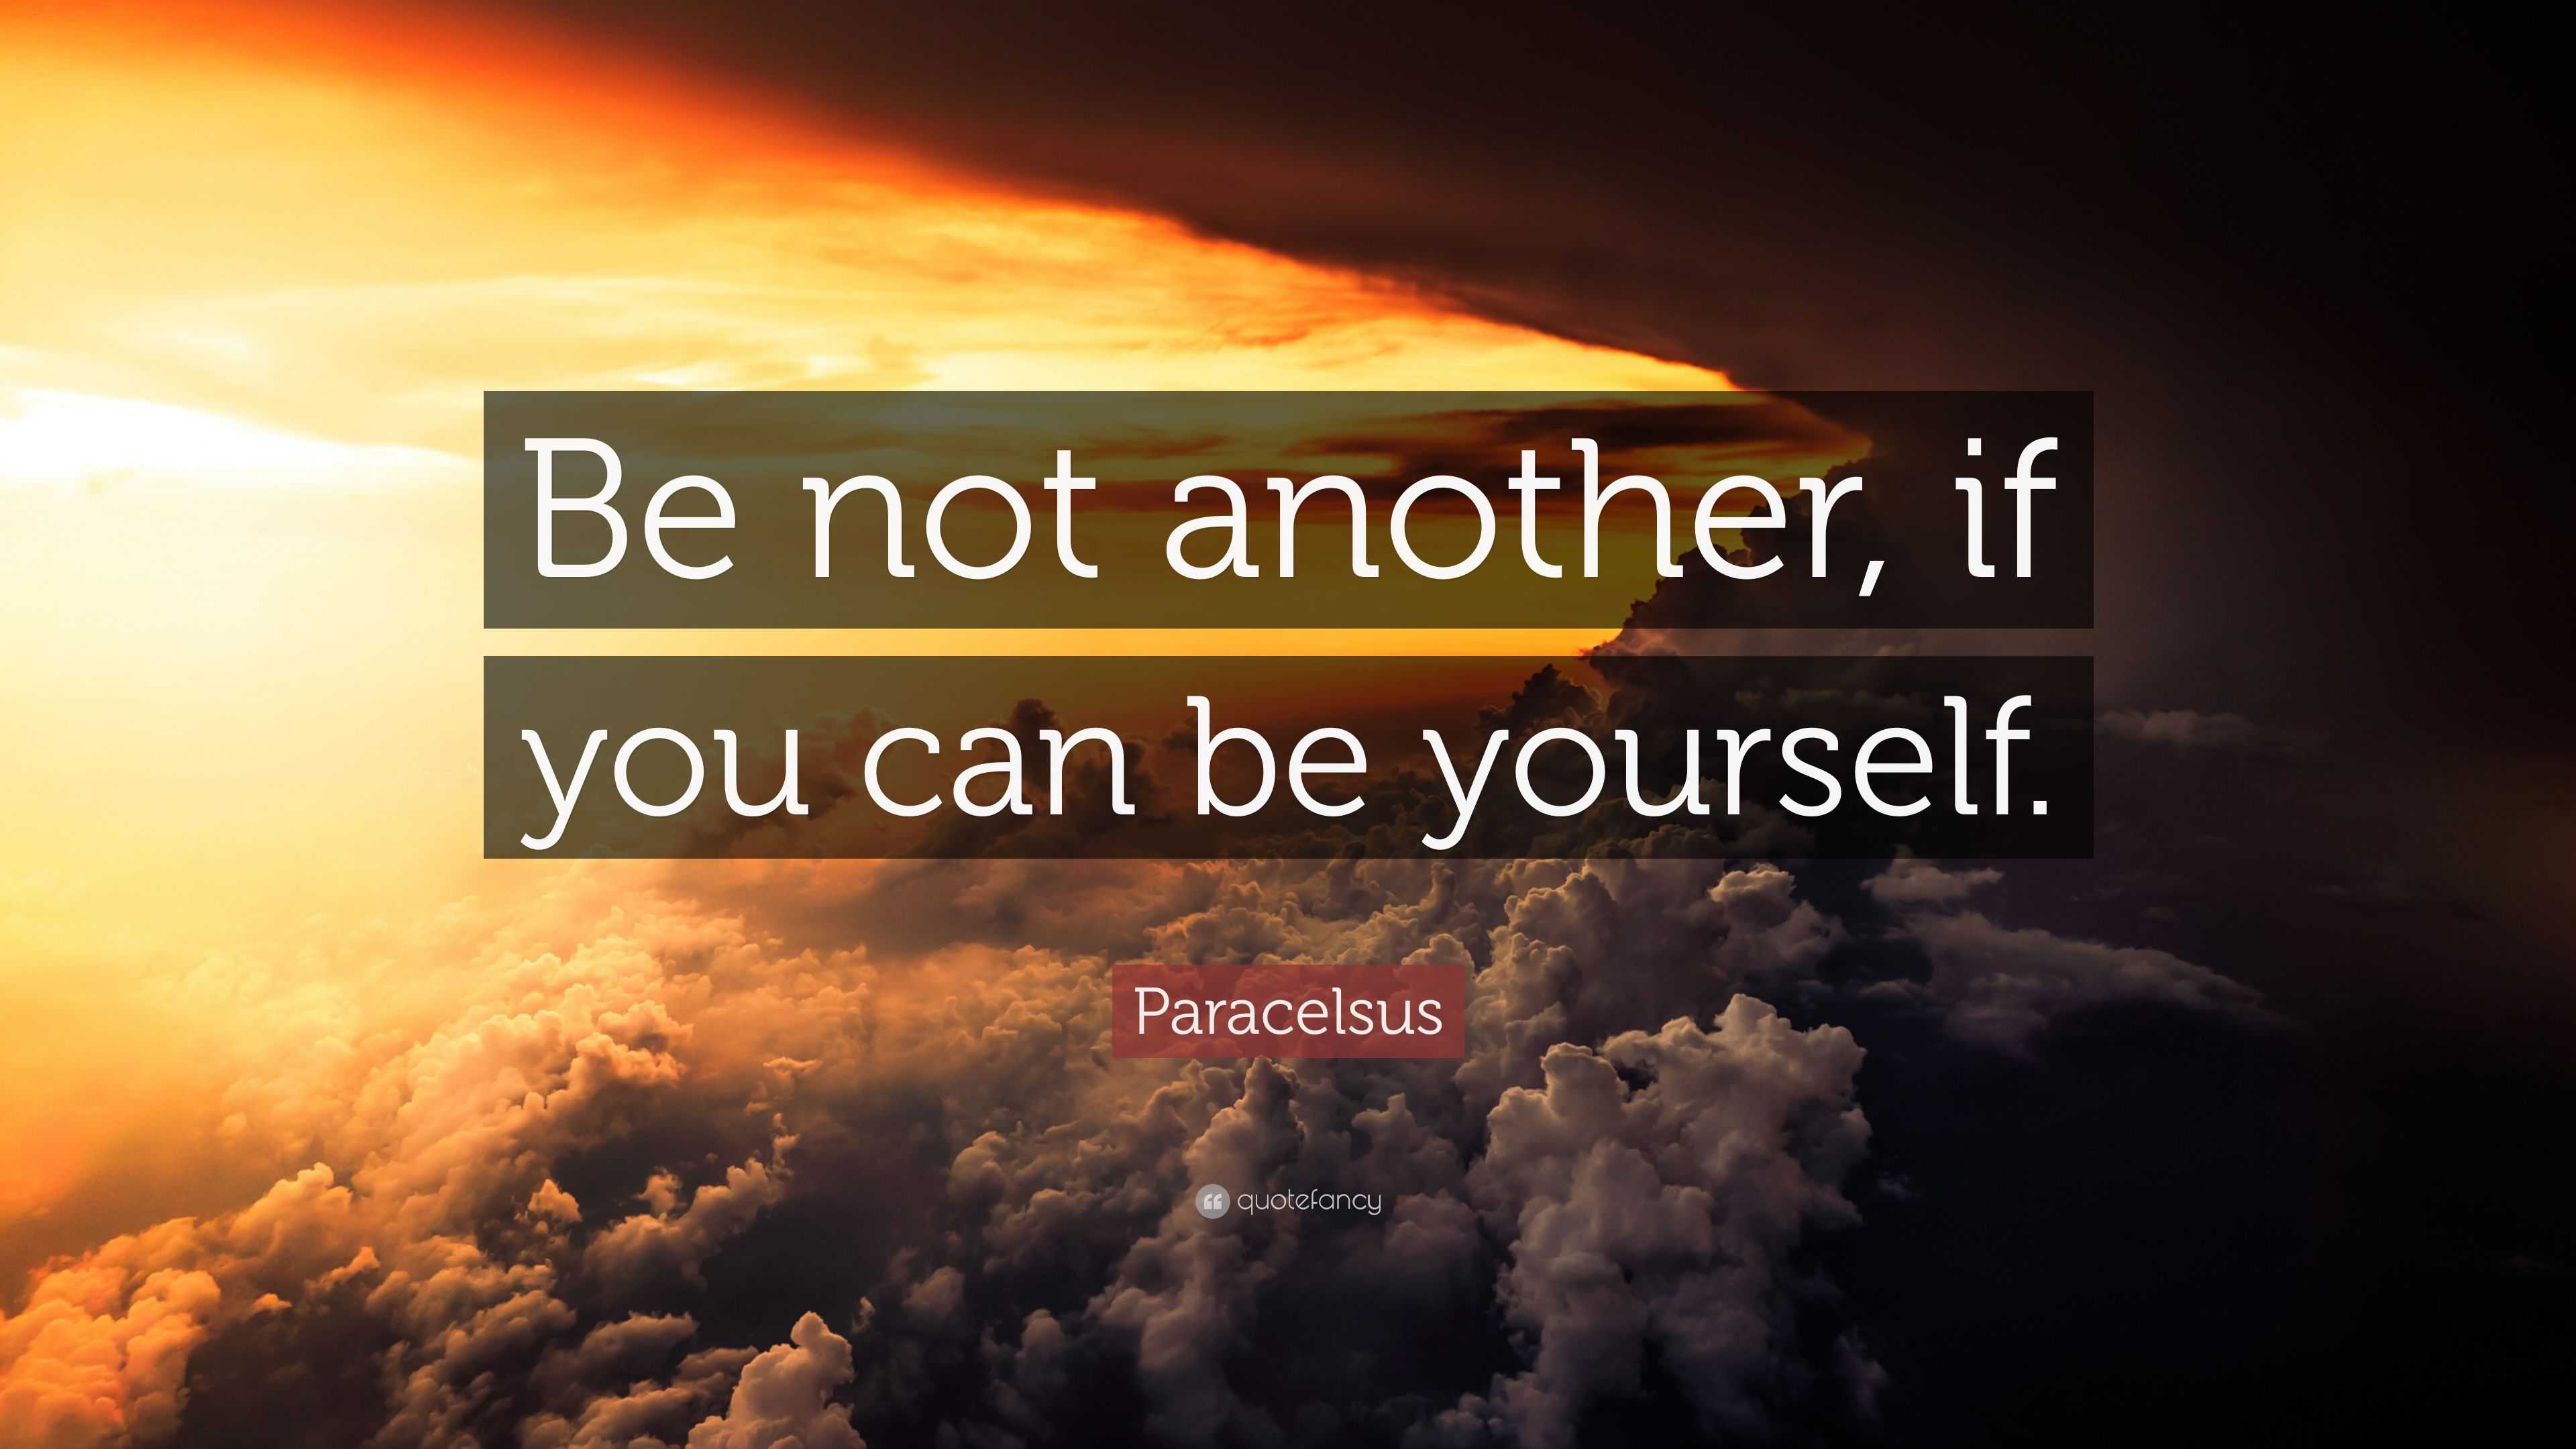 Paracelsus Quote: “Be not another, if you can be yourself.”